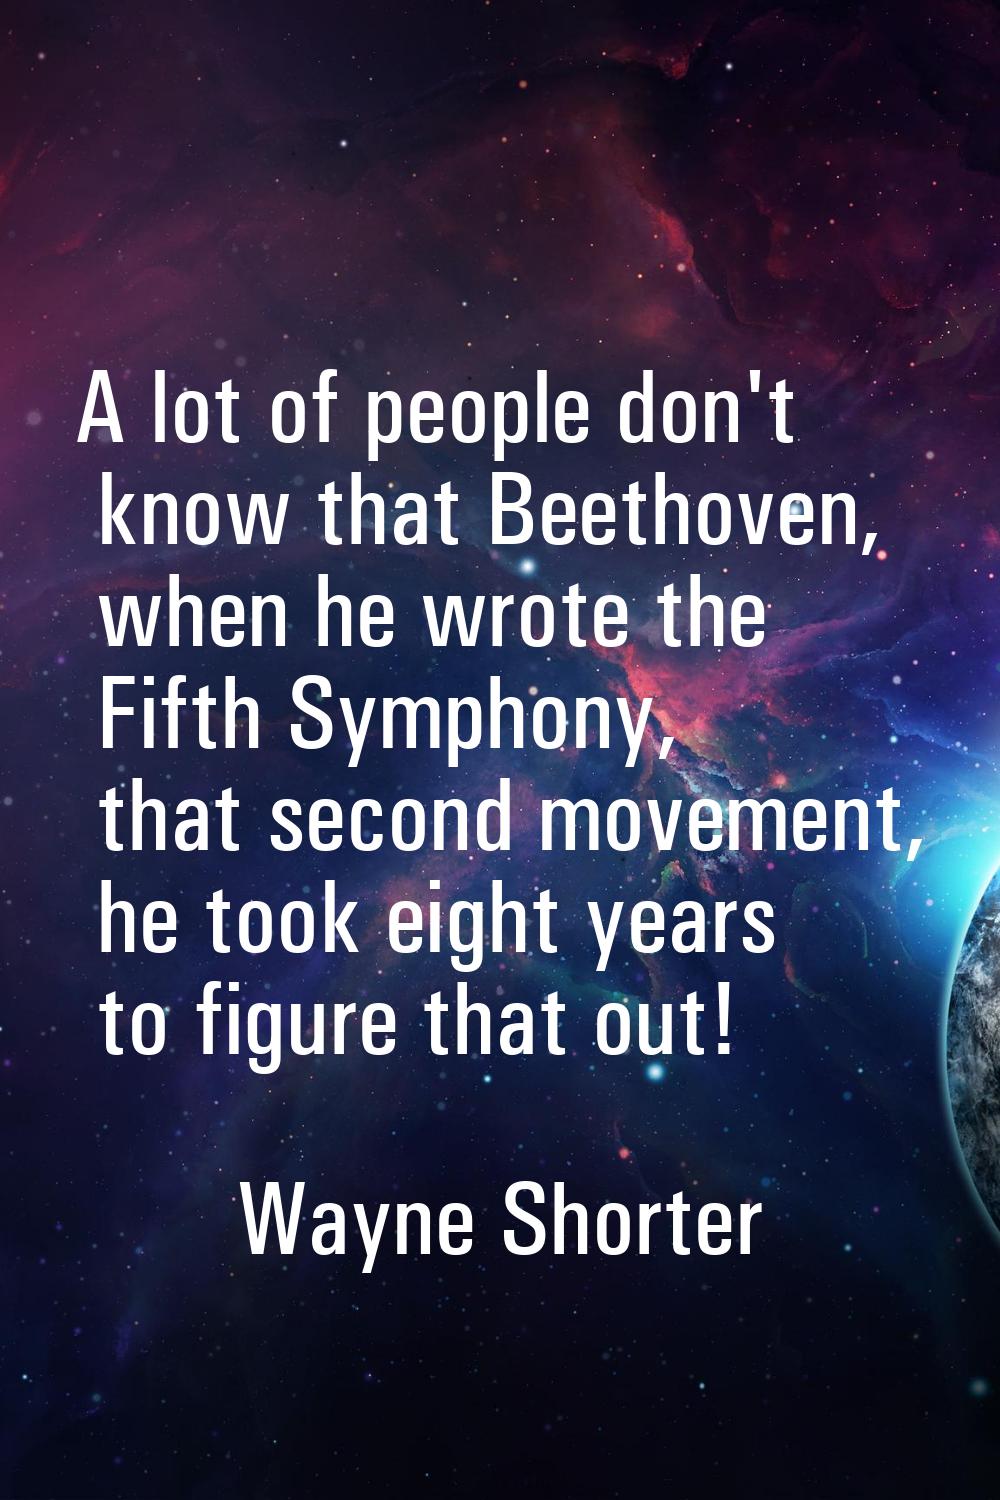 A lot of people don't know that Beethoven, when he wrote the Fifth Symphony, that second movement, 